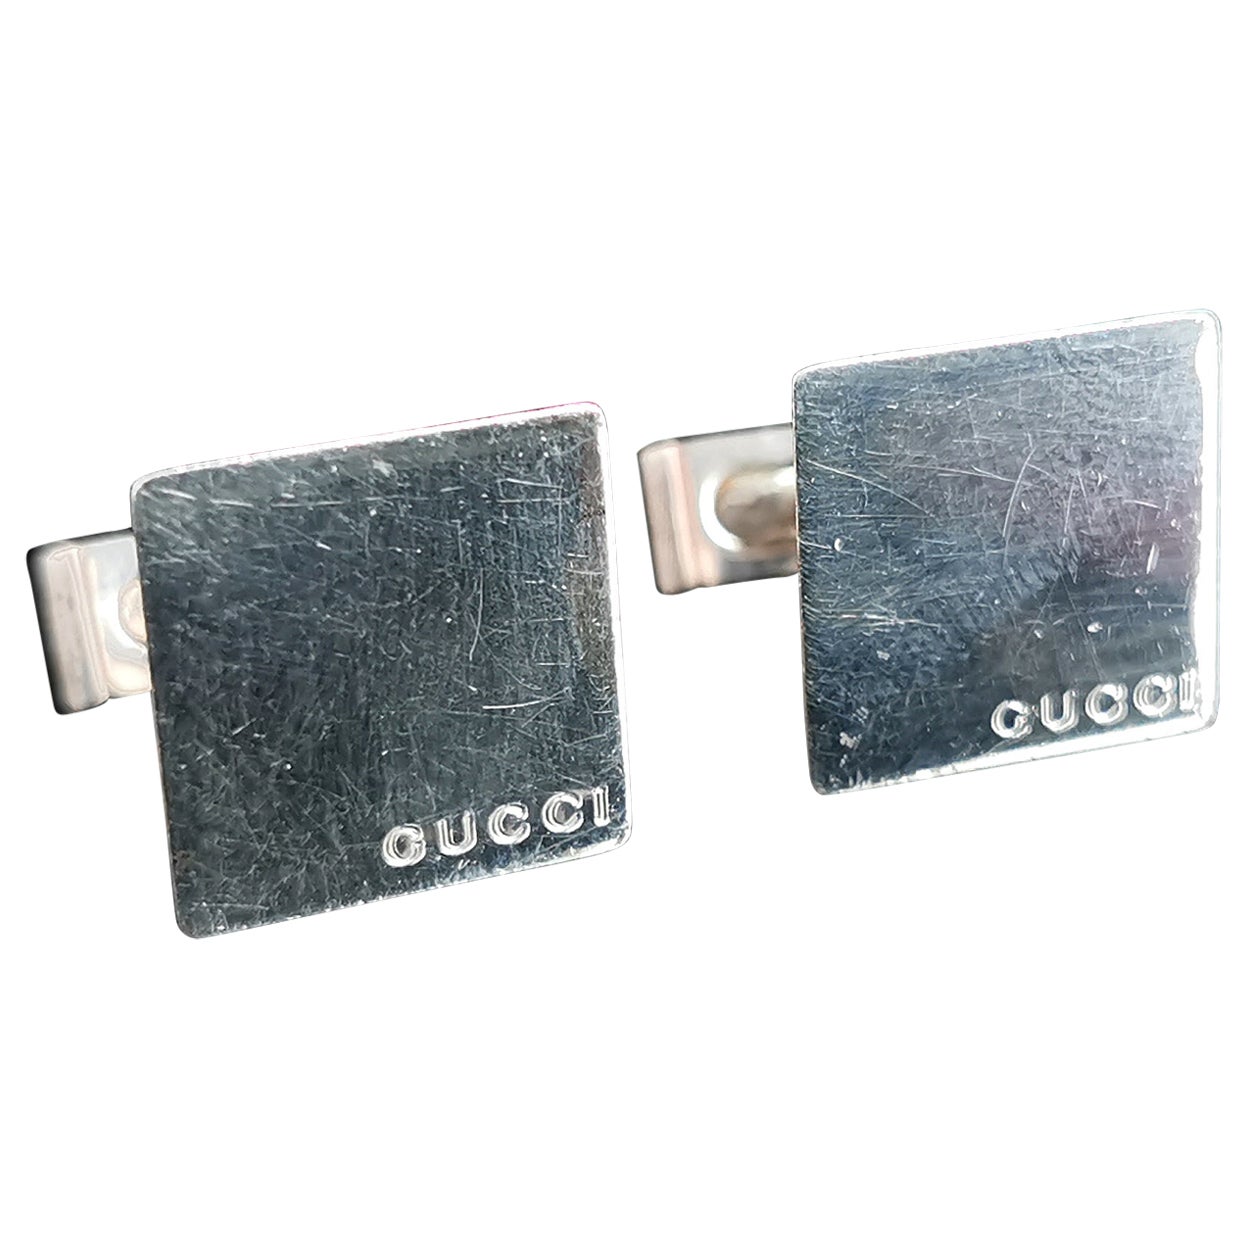 Vintage Sterling silver Gucci cufflinks, square 